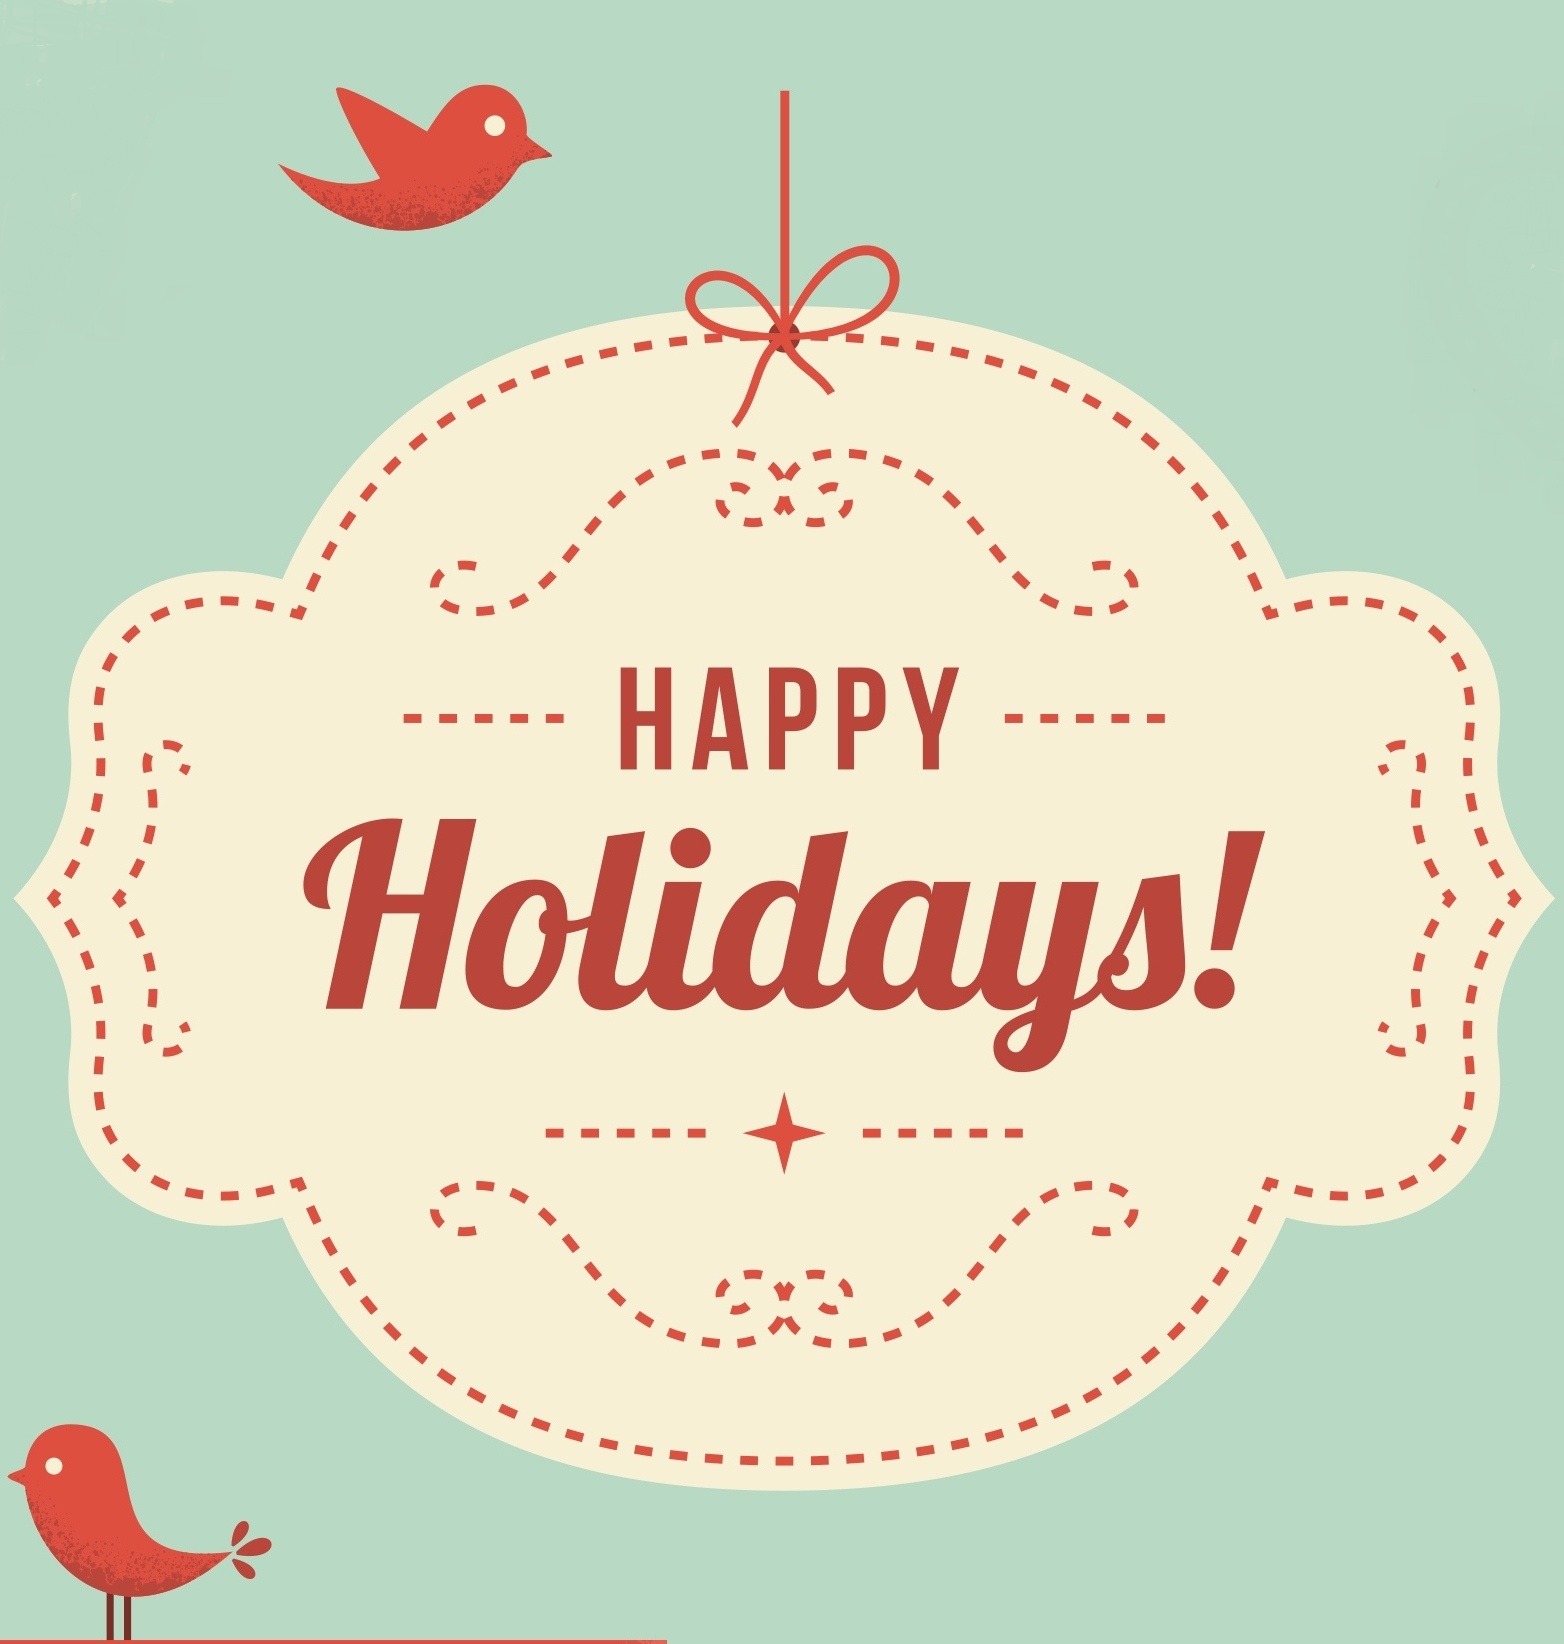 Happy-Holidays-graphic-small